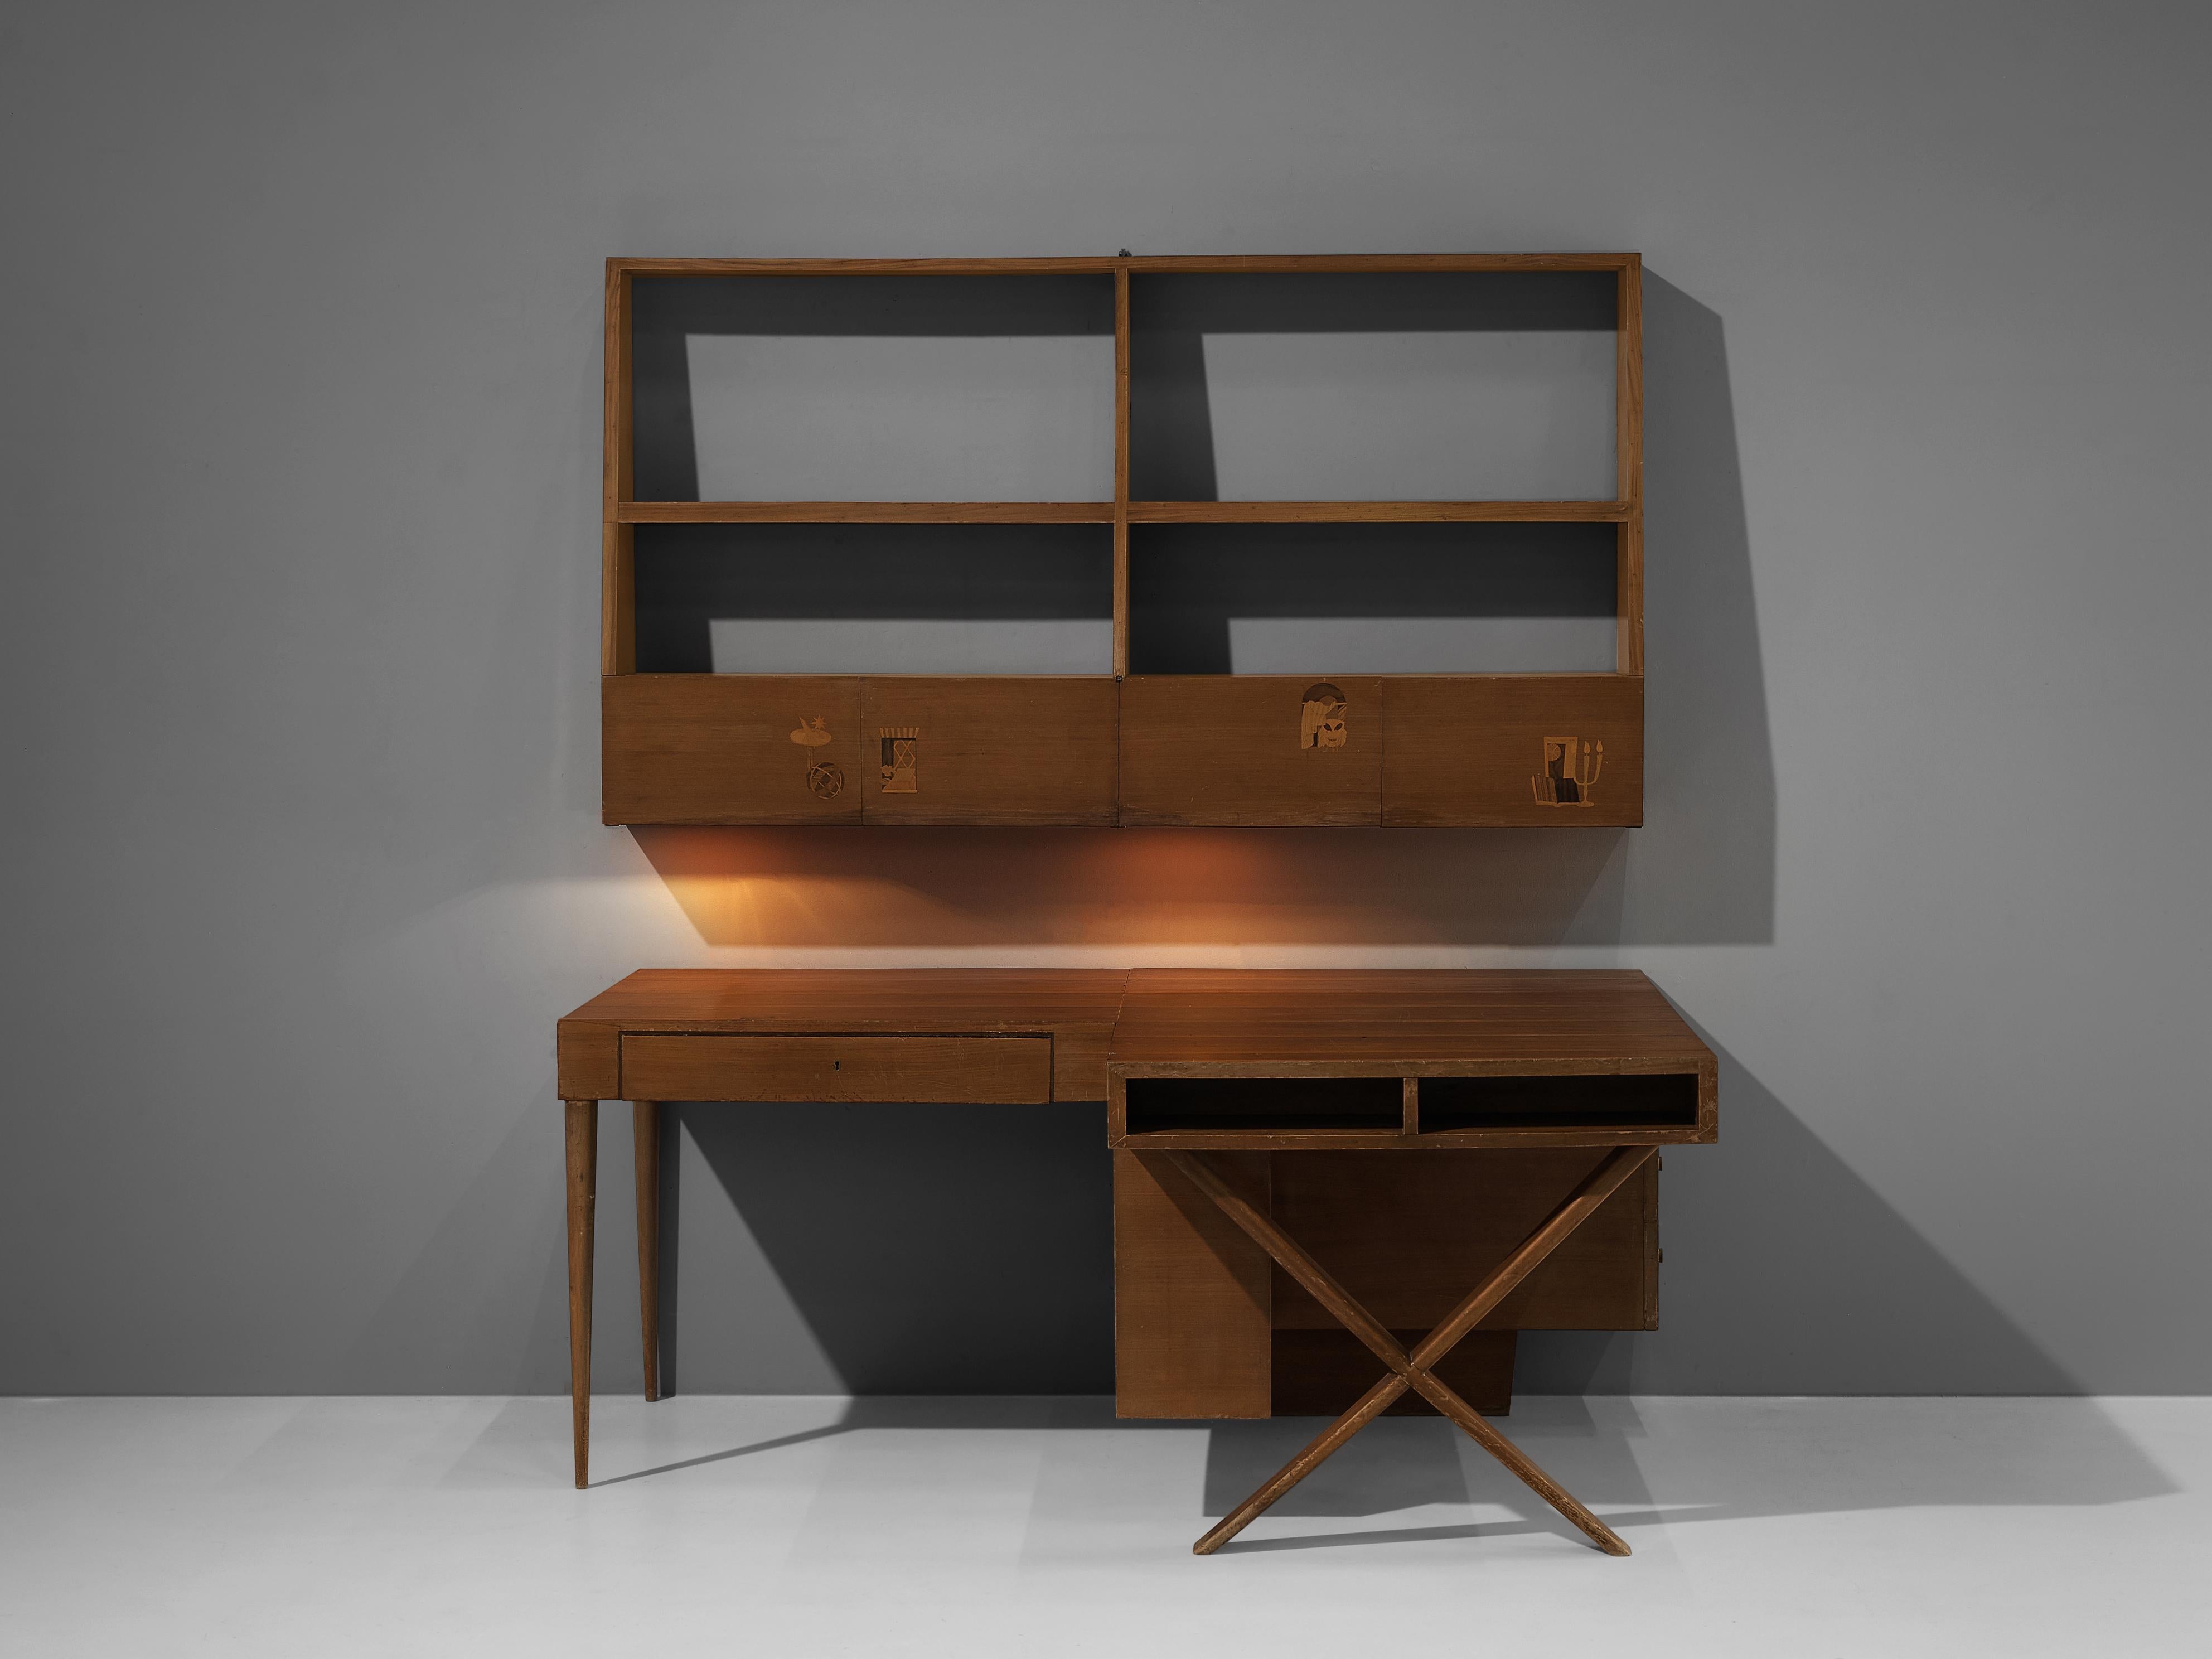 Unique Italian Double Desk with Wall-Shelf in Walnut with Marquetry